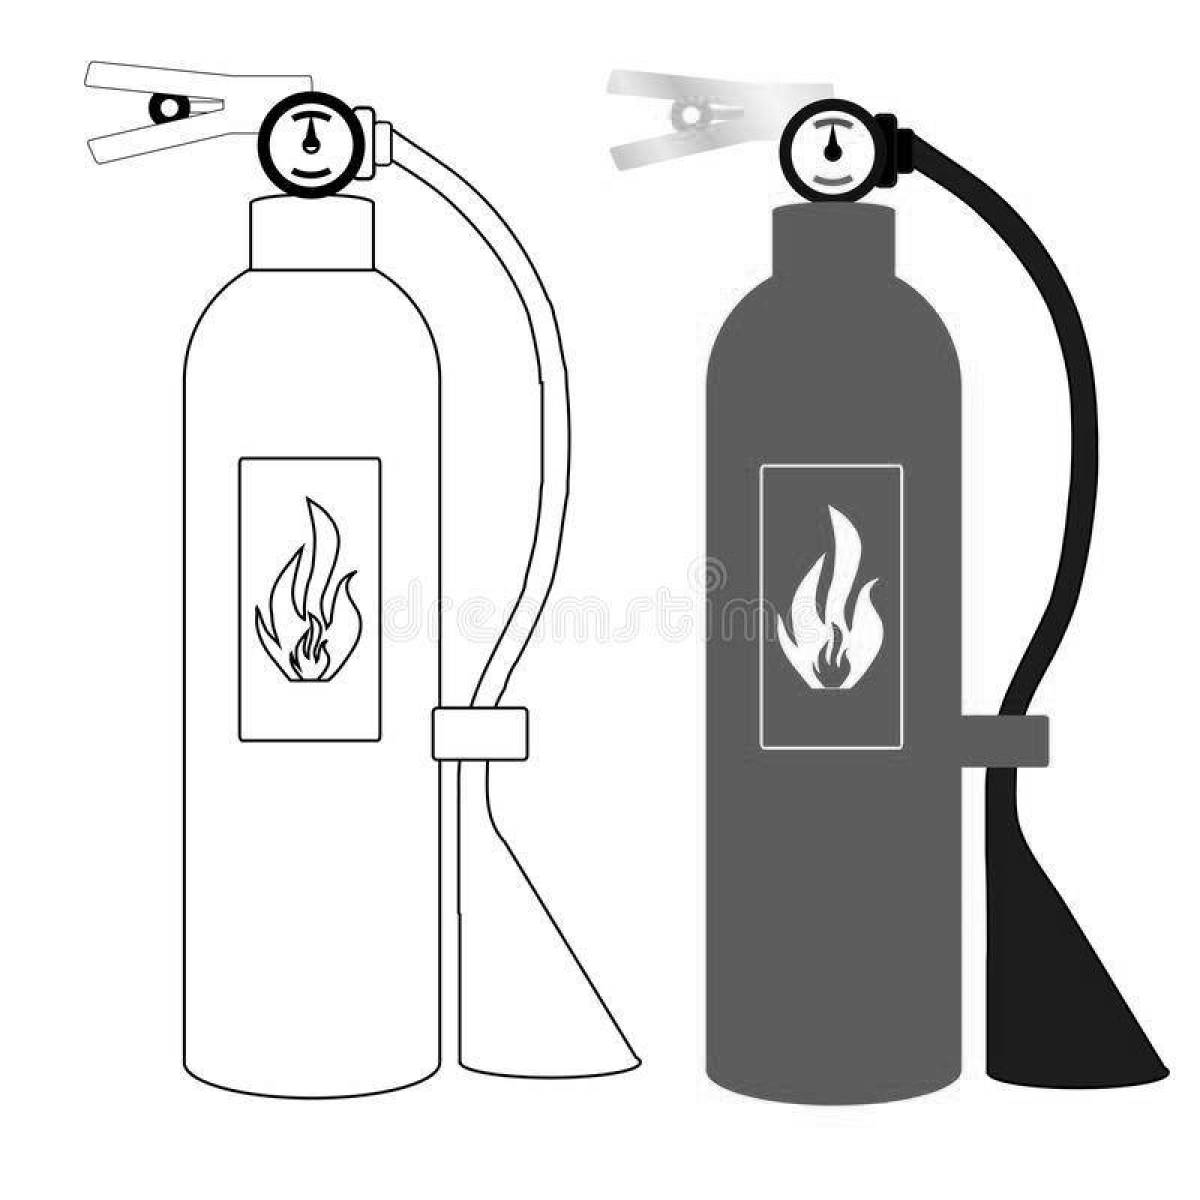 Playful fire extinguisher coloring page